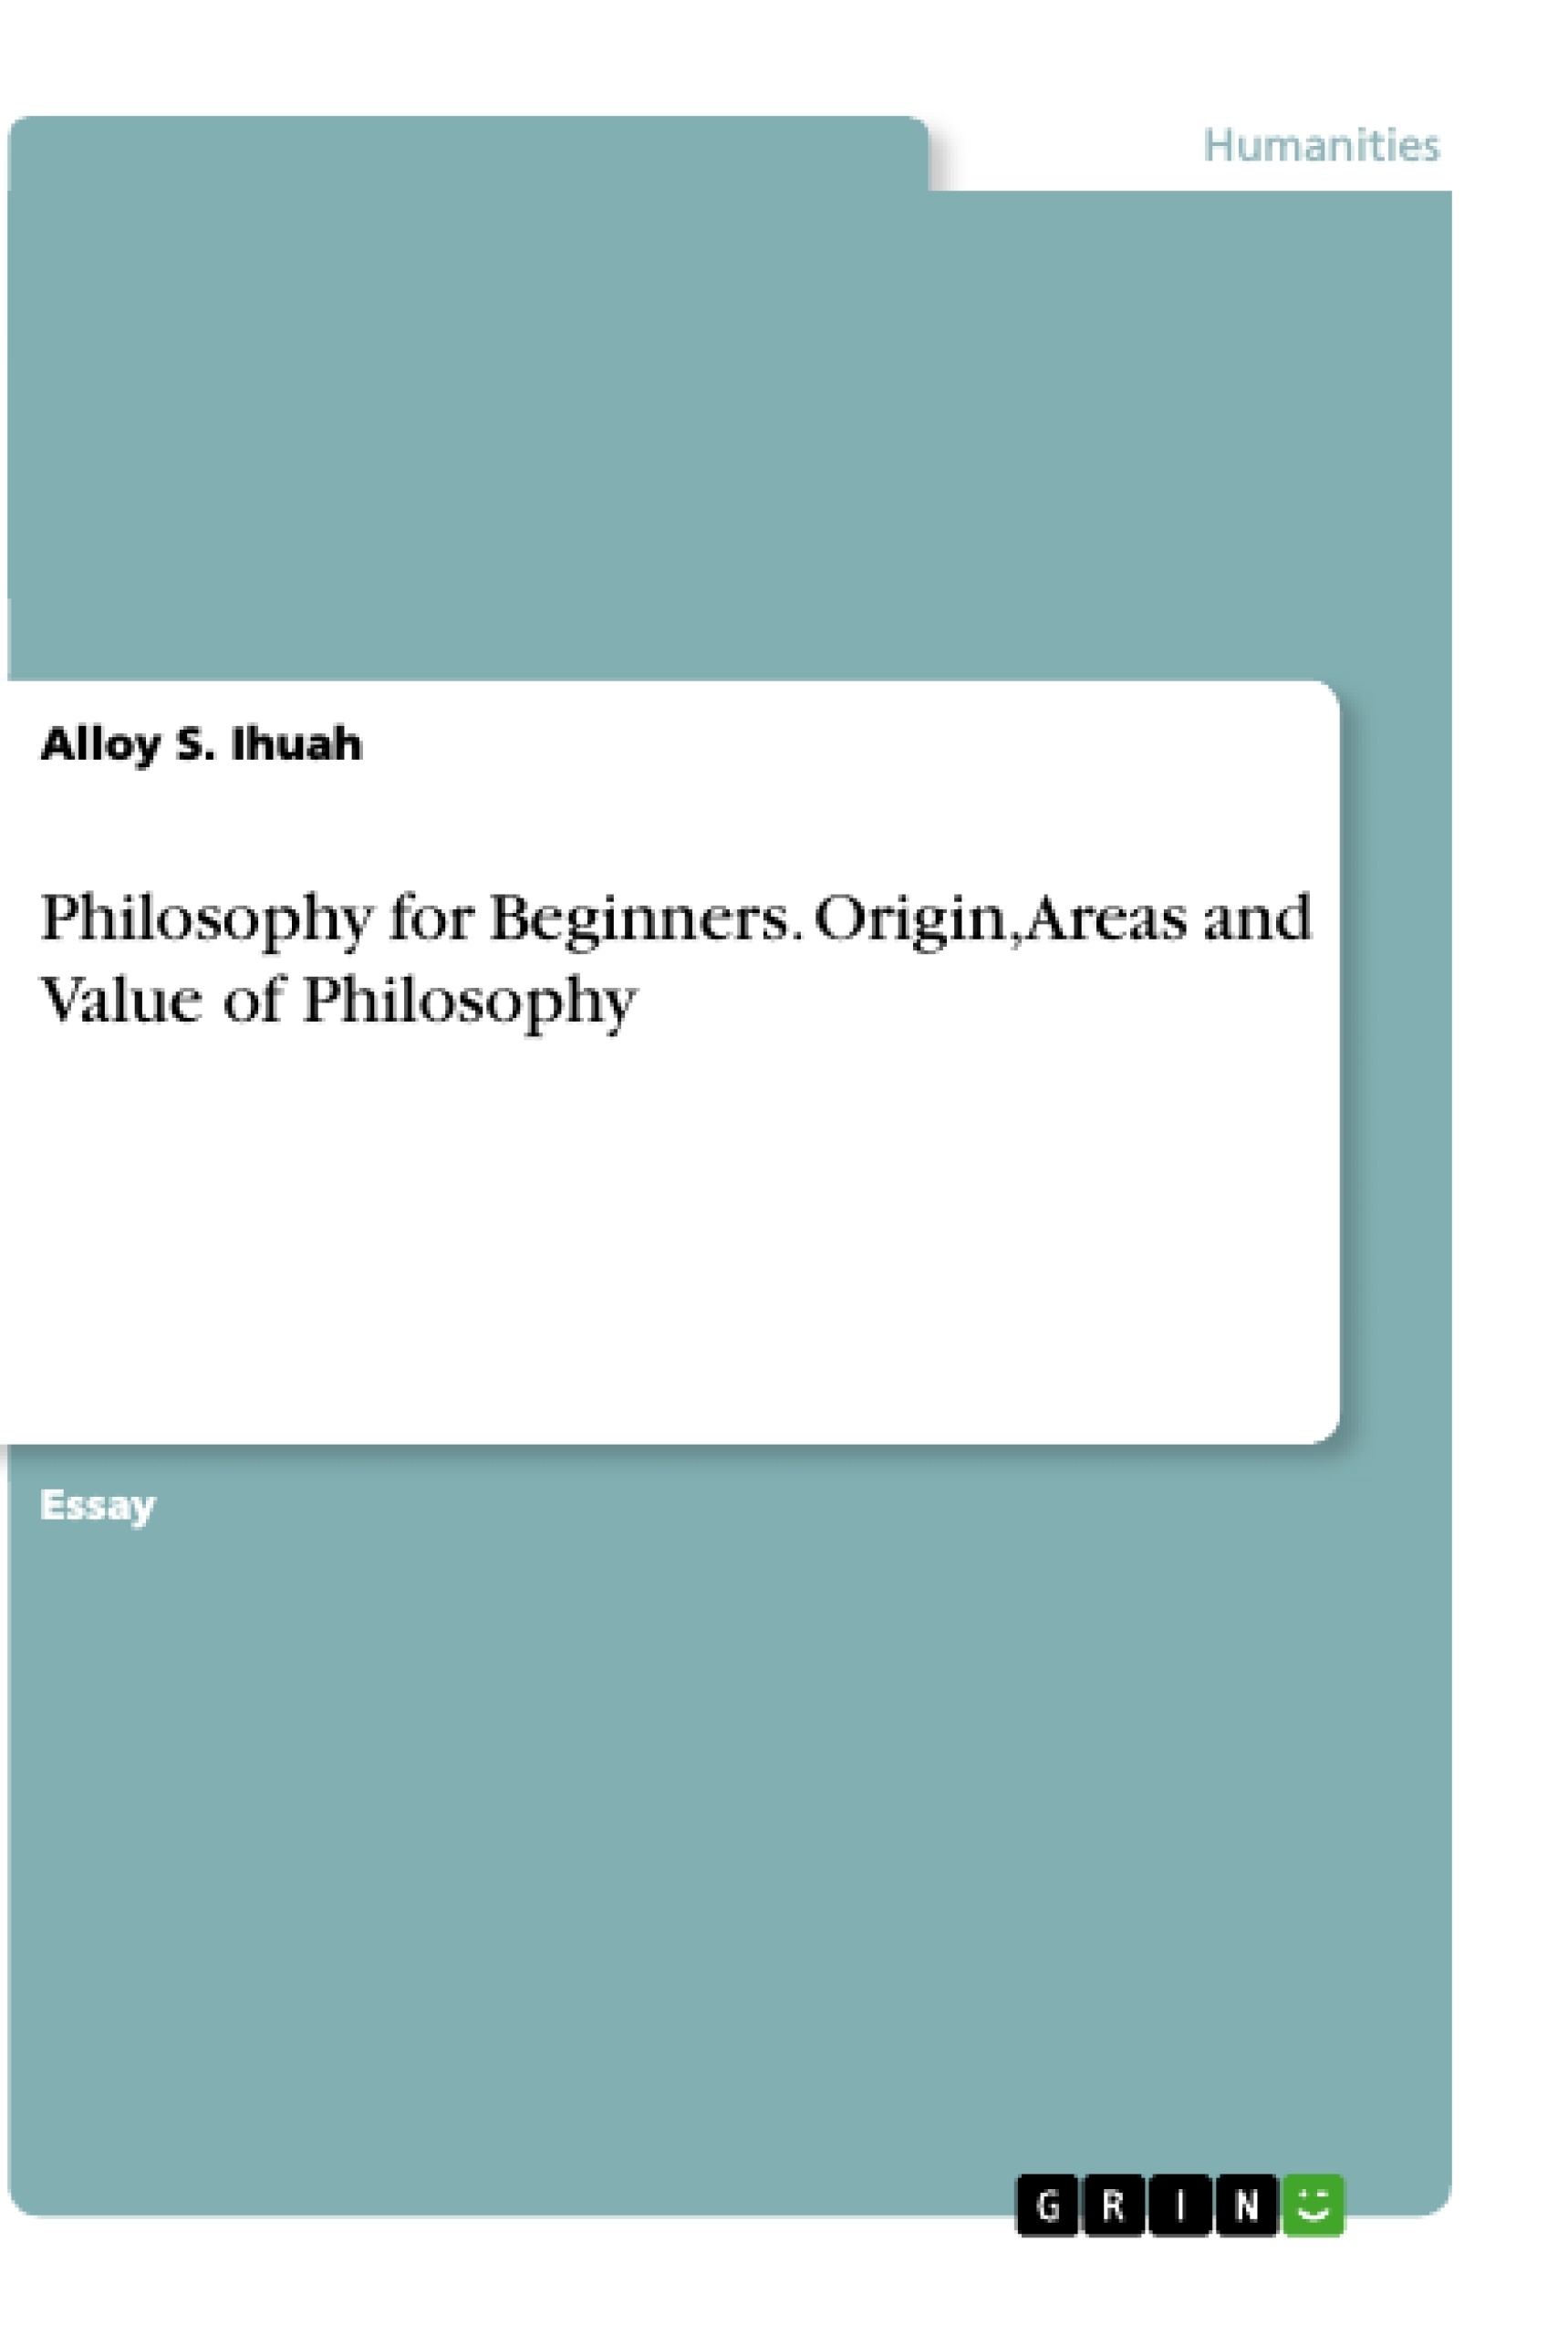 Philosophy　Philosophy　Origin,　Areas　of　for　Value　and　Beginners.　GRIN